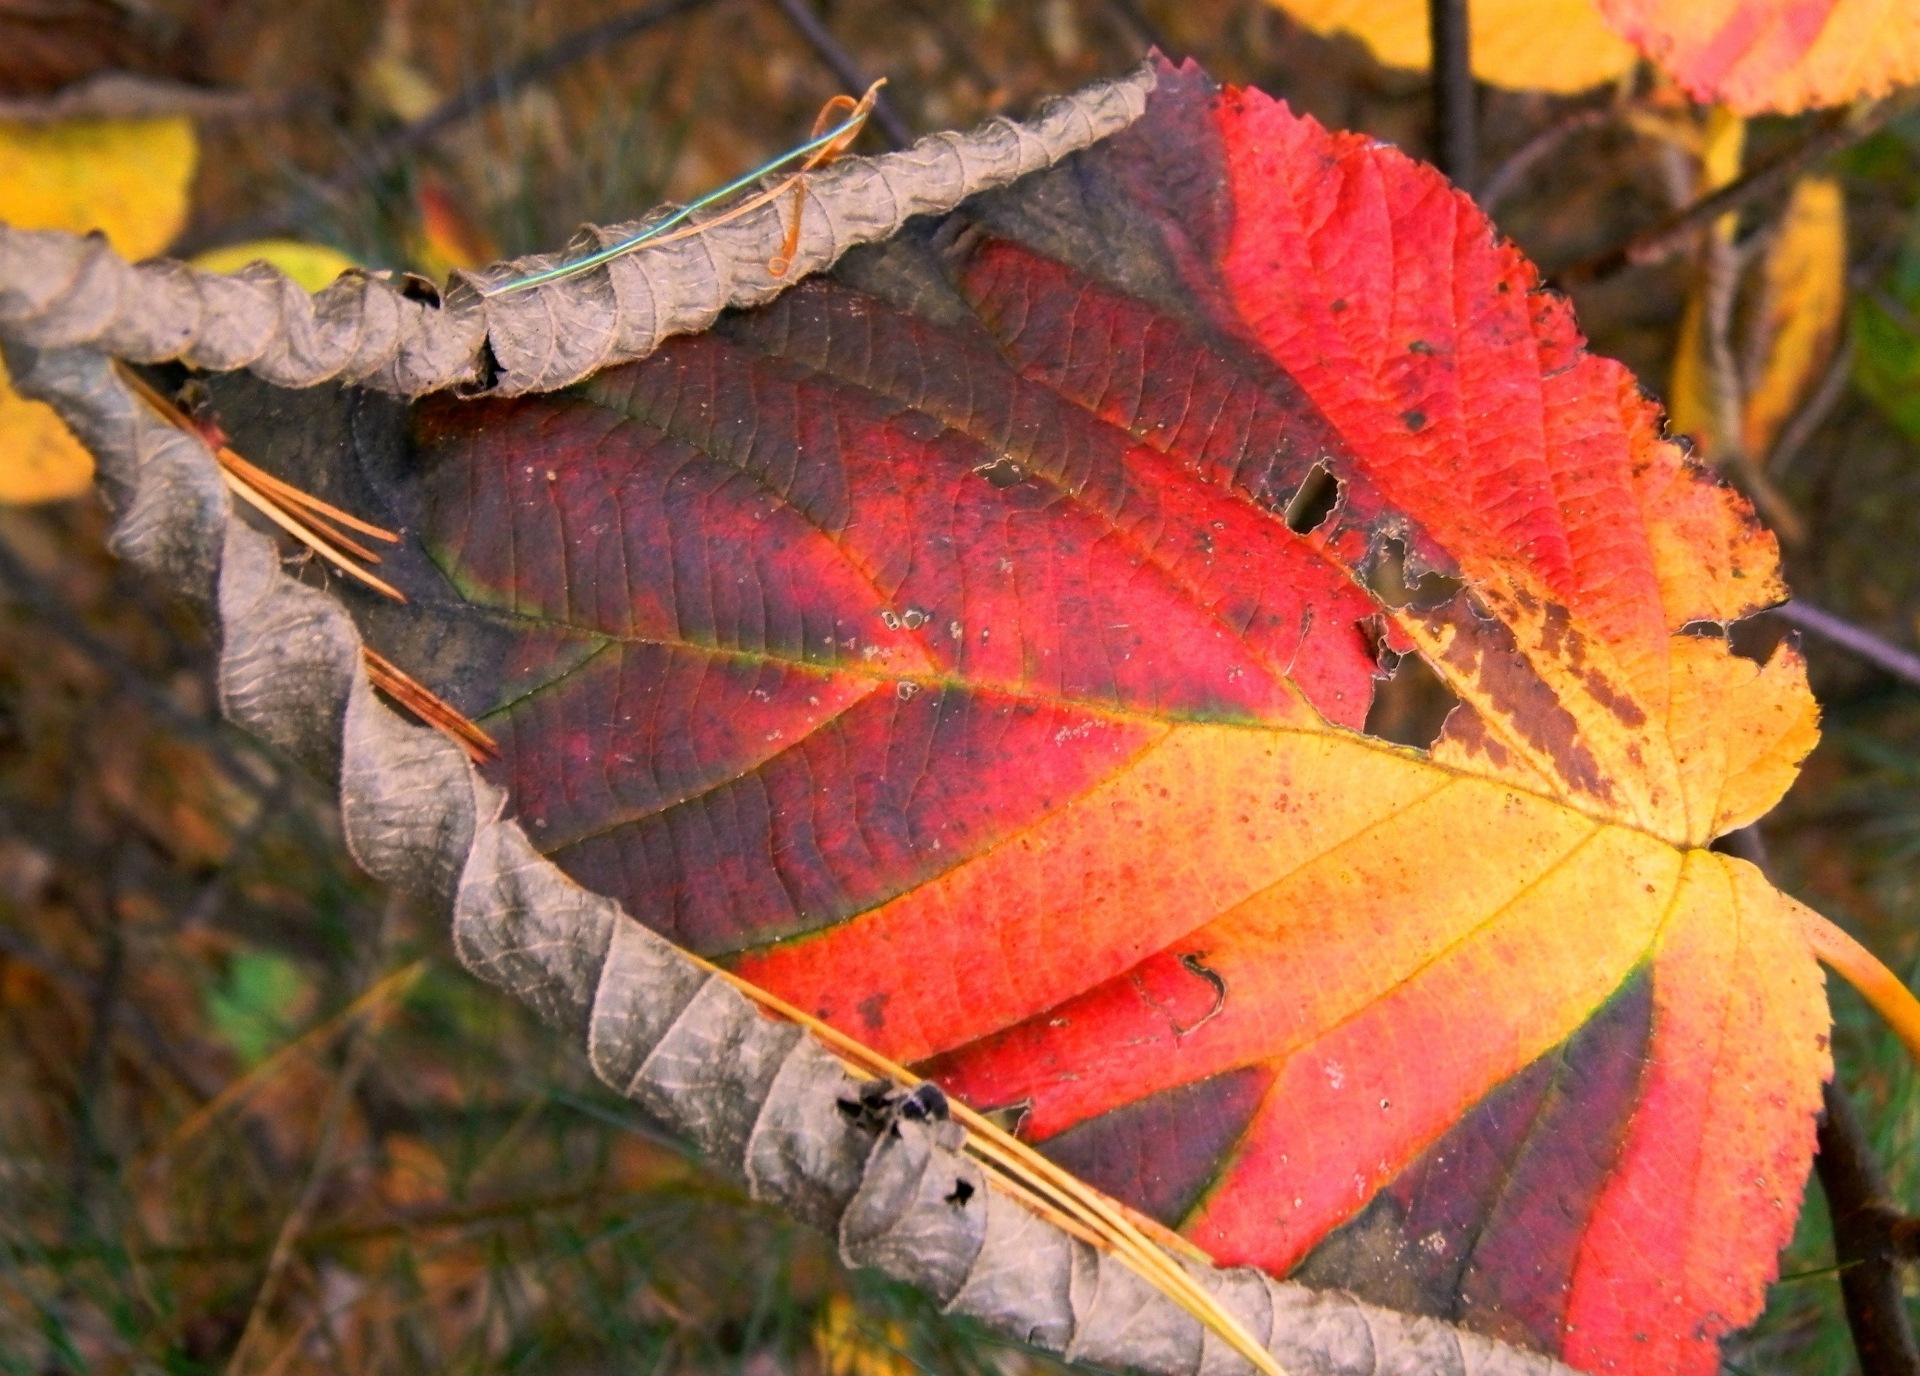 Close-up of a single large autumn leaf whose colors are yellow, red, orange and brown